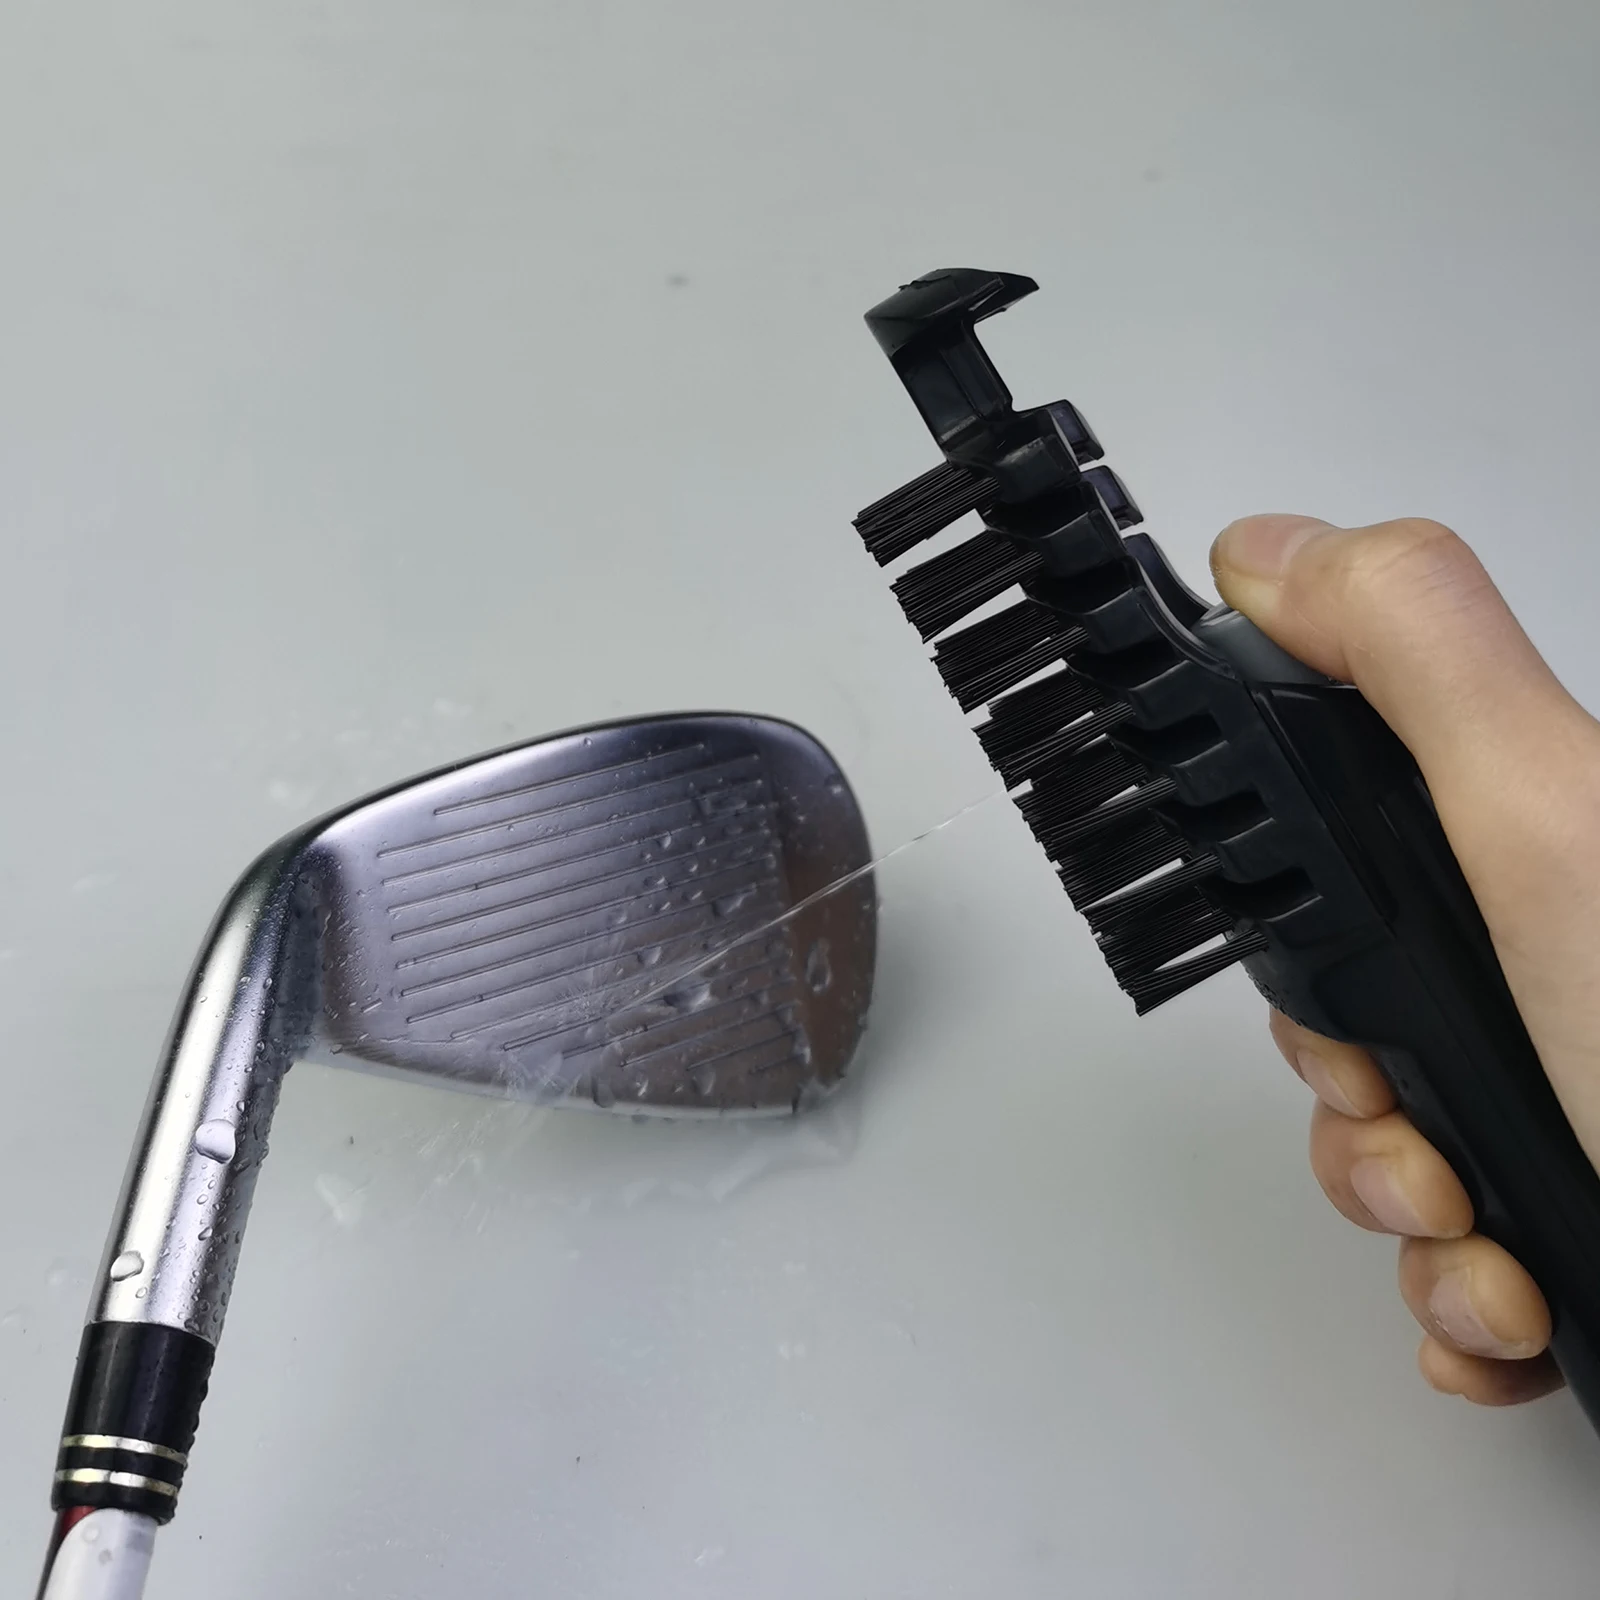 Solid Golf Club Brush Wet Water Spraying Cleaning Brushes, Portable Groove Cleaner Ball Washing Kit Maintainer